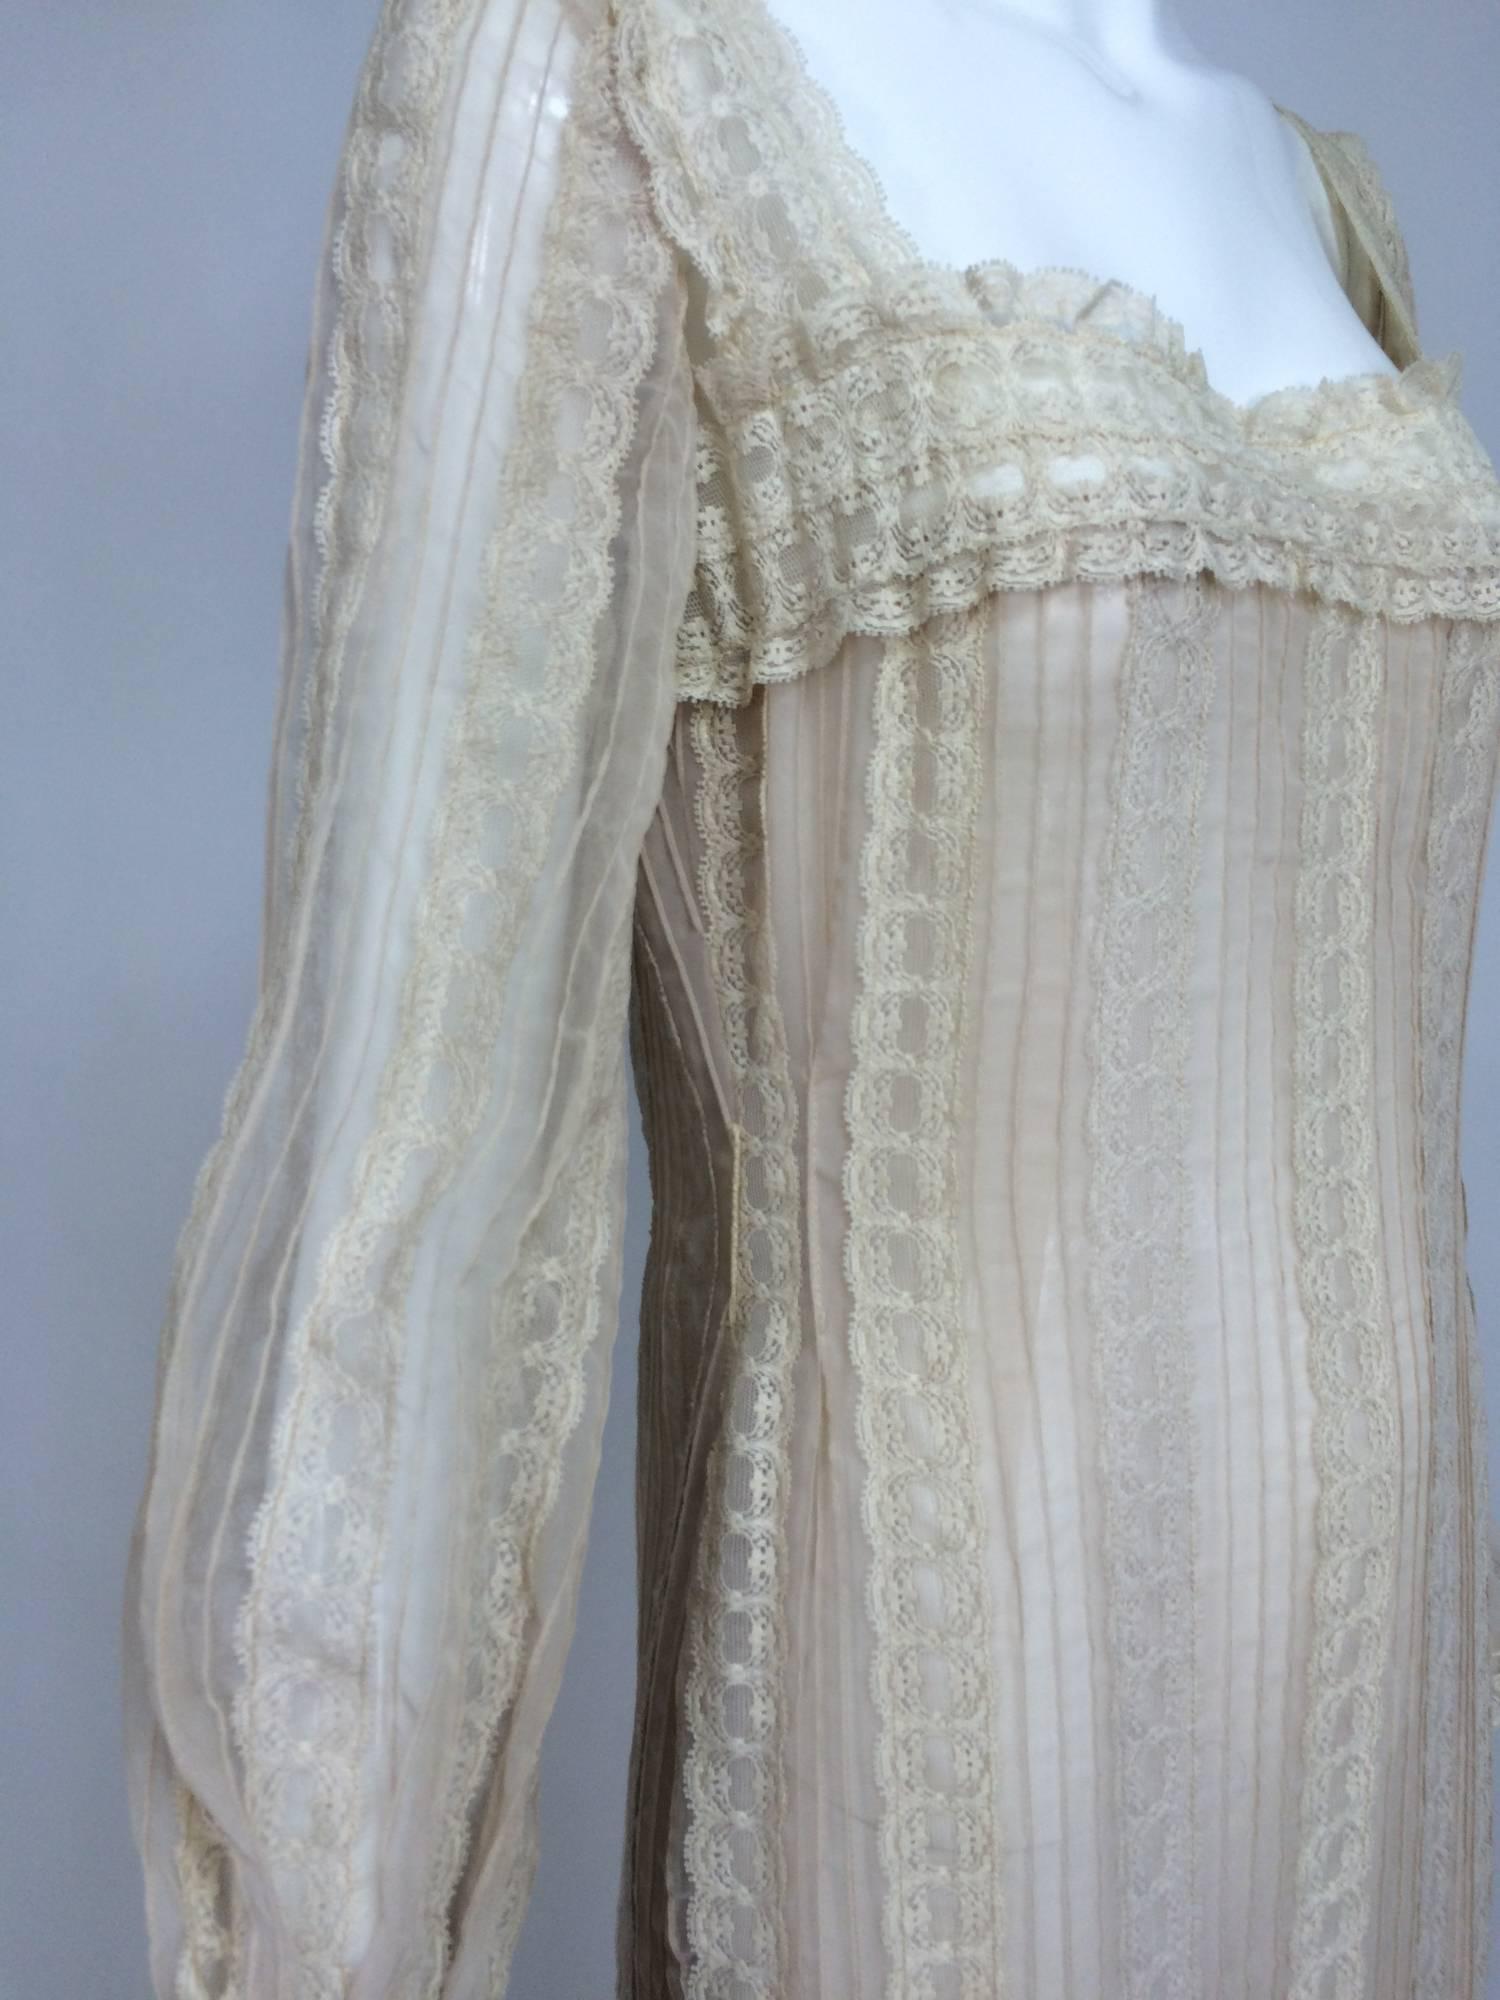 Vintage rosy taupe organza & lace square neck maxi dress 1960s...With all the romance the mid 60s brought to the fashion scene, with design references to 18th century ...This dress has a deep square neckline edged in lace, it is semi fitted through